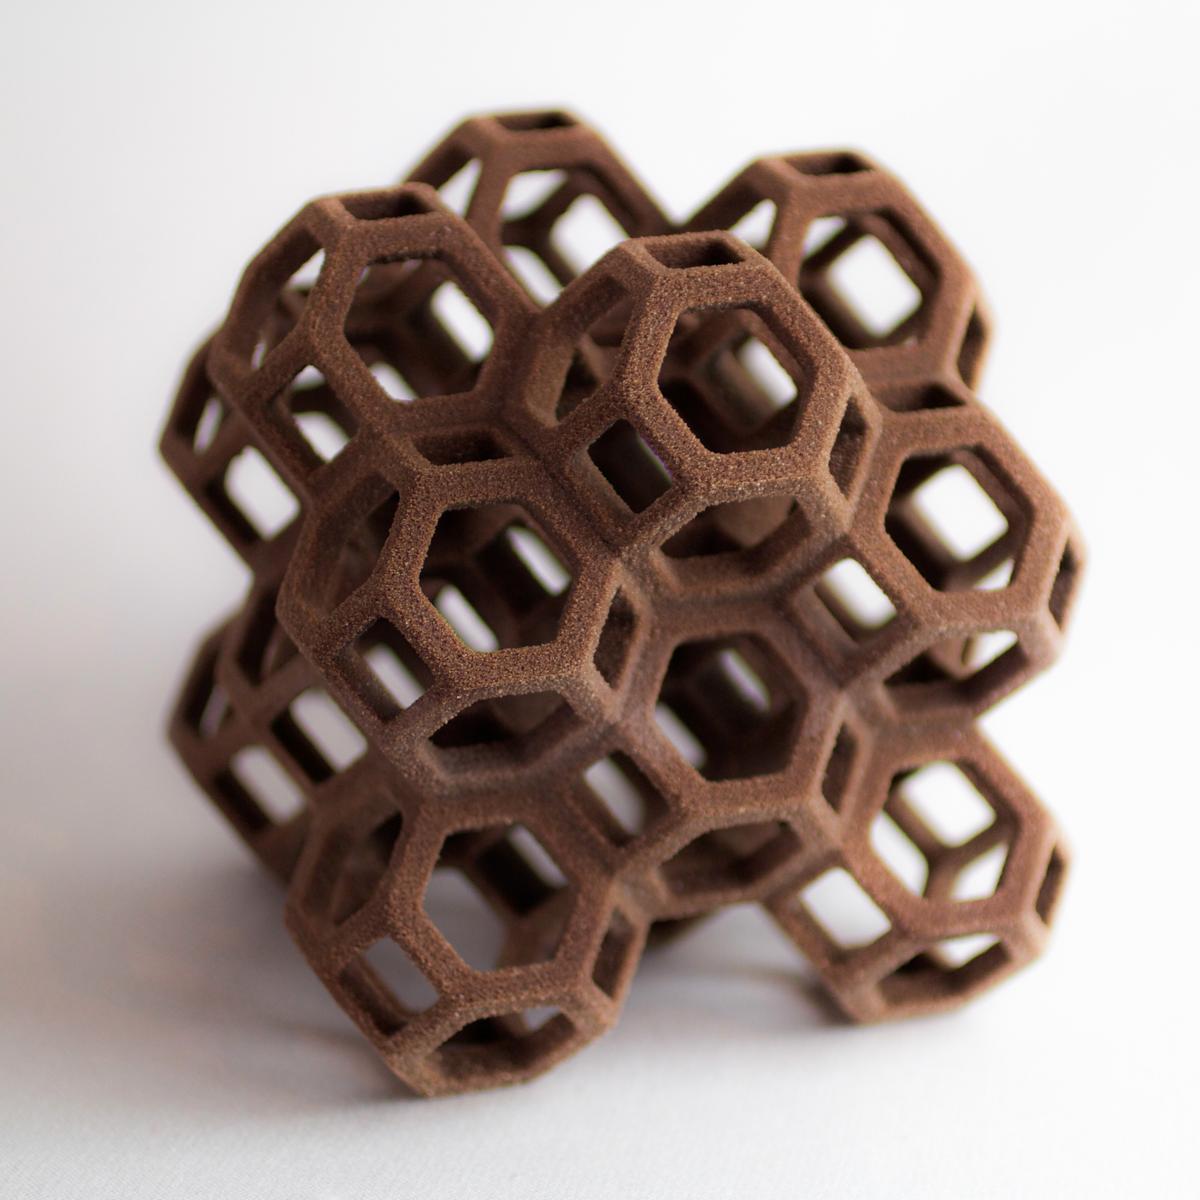 With 3D printed chocolate coming in the near future, how will the chocolate snacking business be changed? Let us know your thoughts!